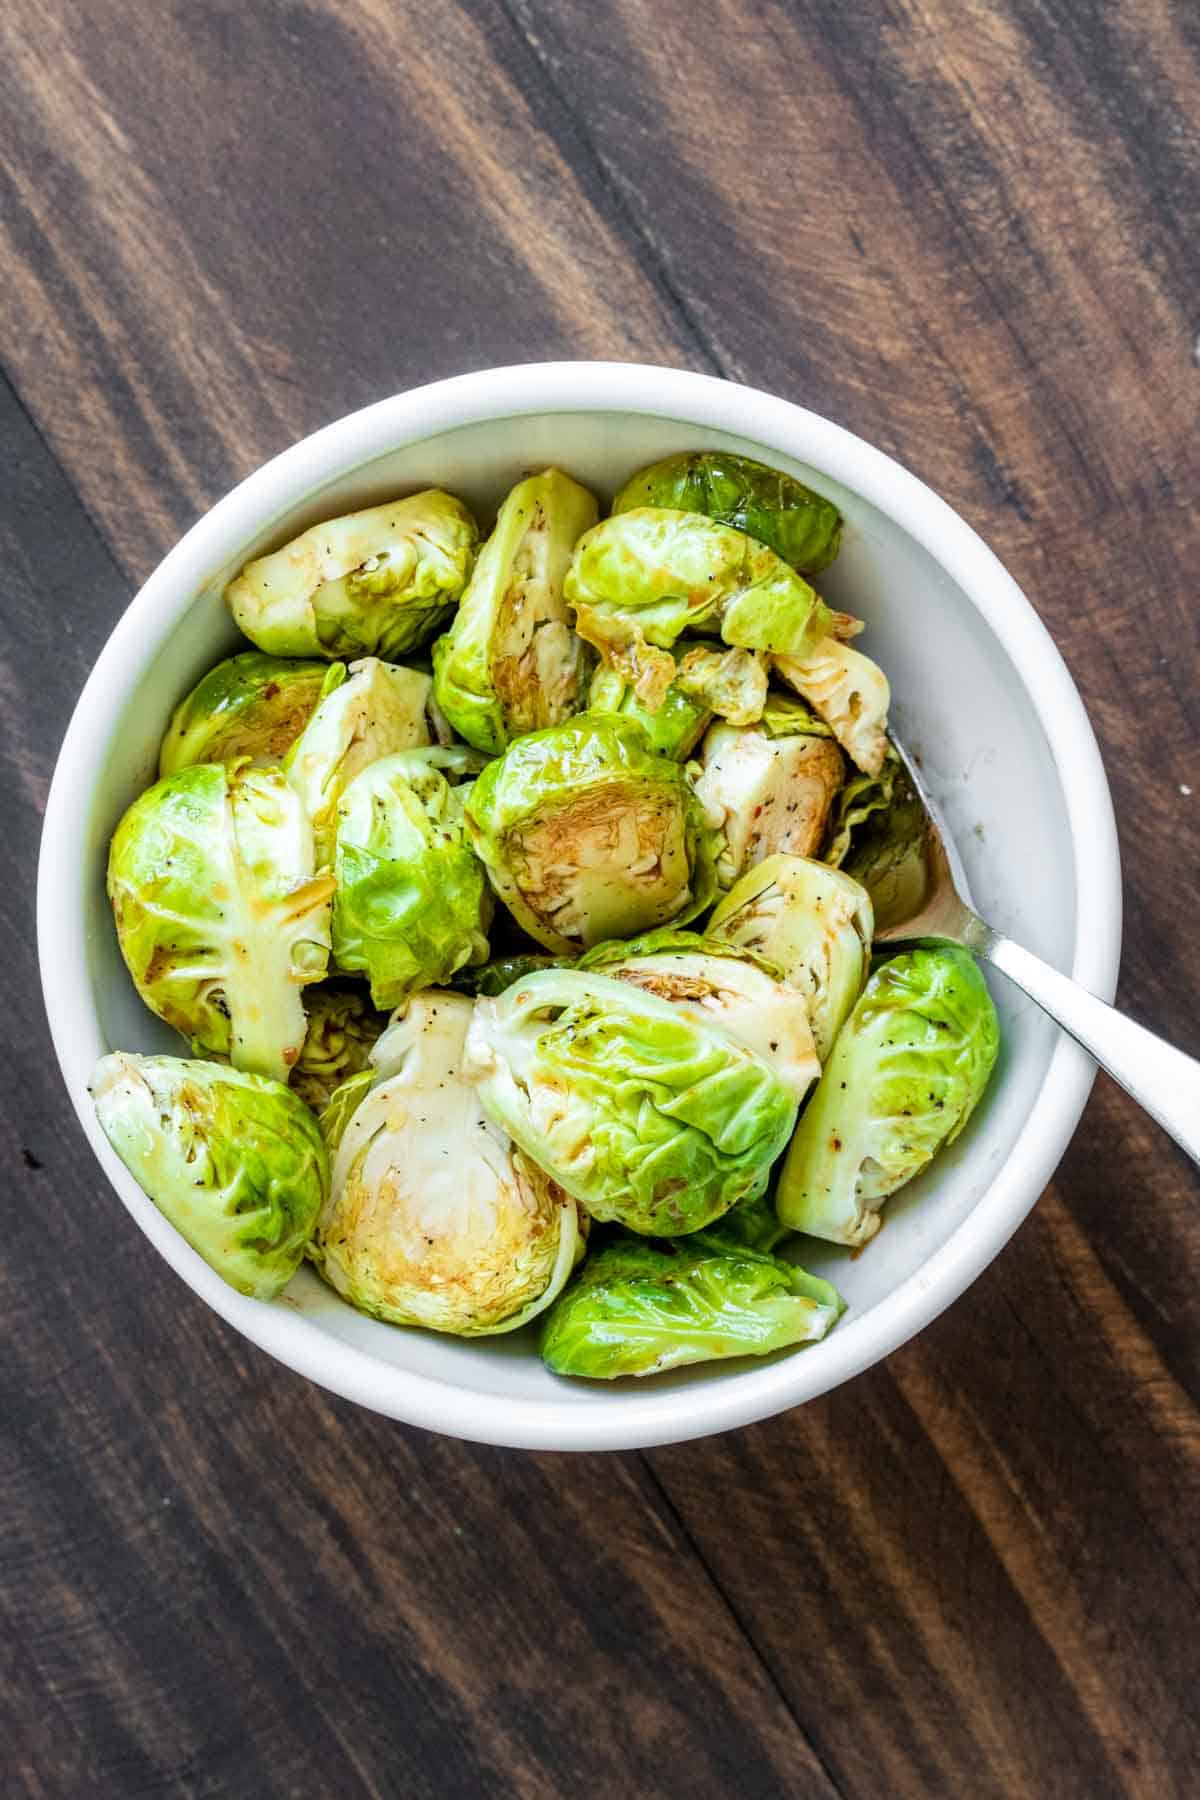 Spoon mixing Brussels sprouts with maple syrup and seasoning in a white bowl